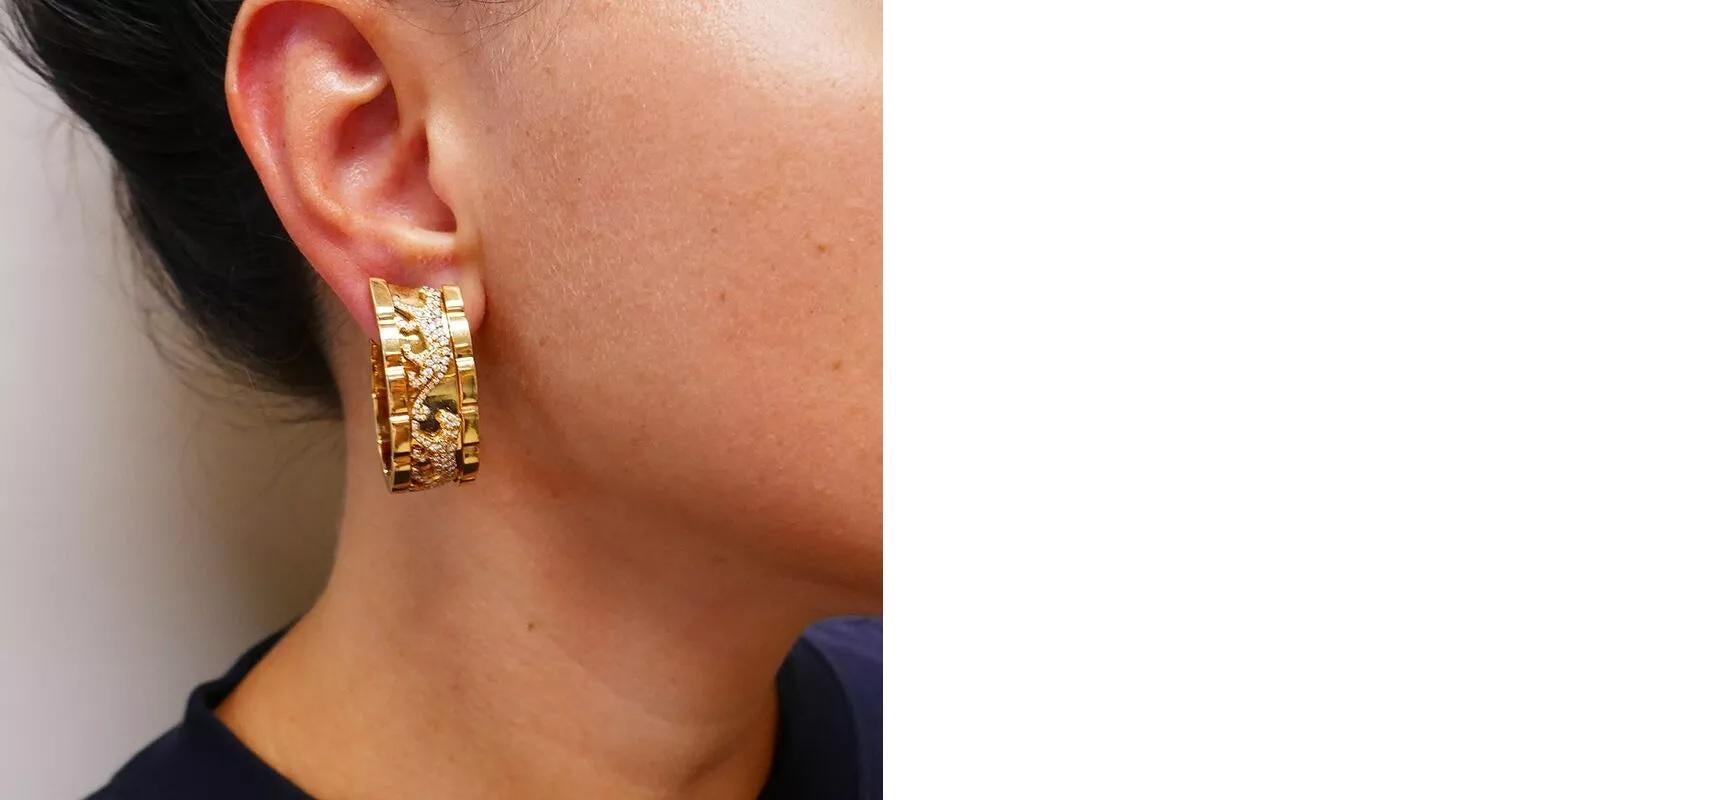 Cartier Walking Panthere Earrings, a true icon in the world of luxury jewelry. 

Crafted in 18k yellow gold, these earrings are designed as wide hoops, exquisitely depicting walking pantheres, Cartier's emblematic feline motif. 

The captivating